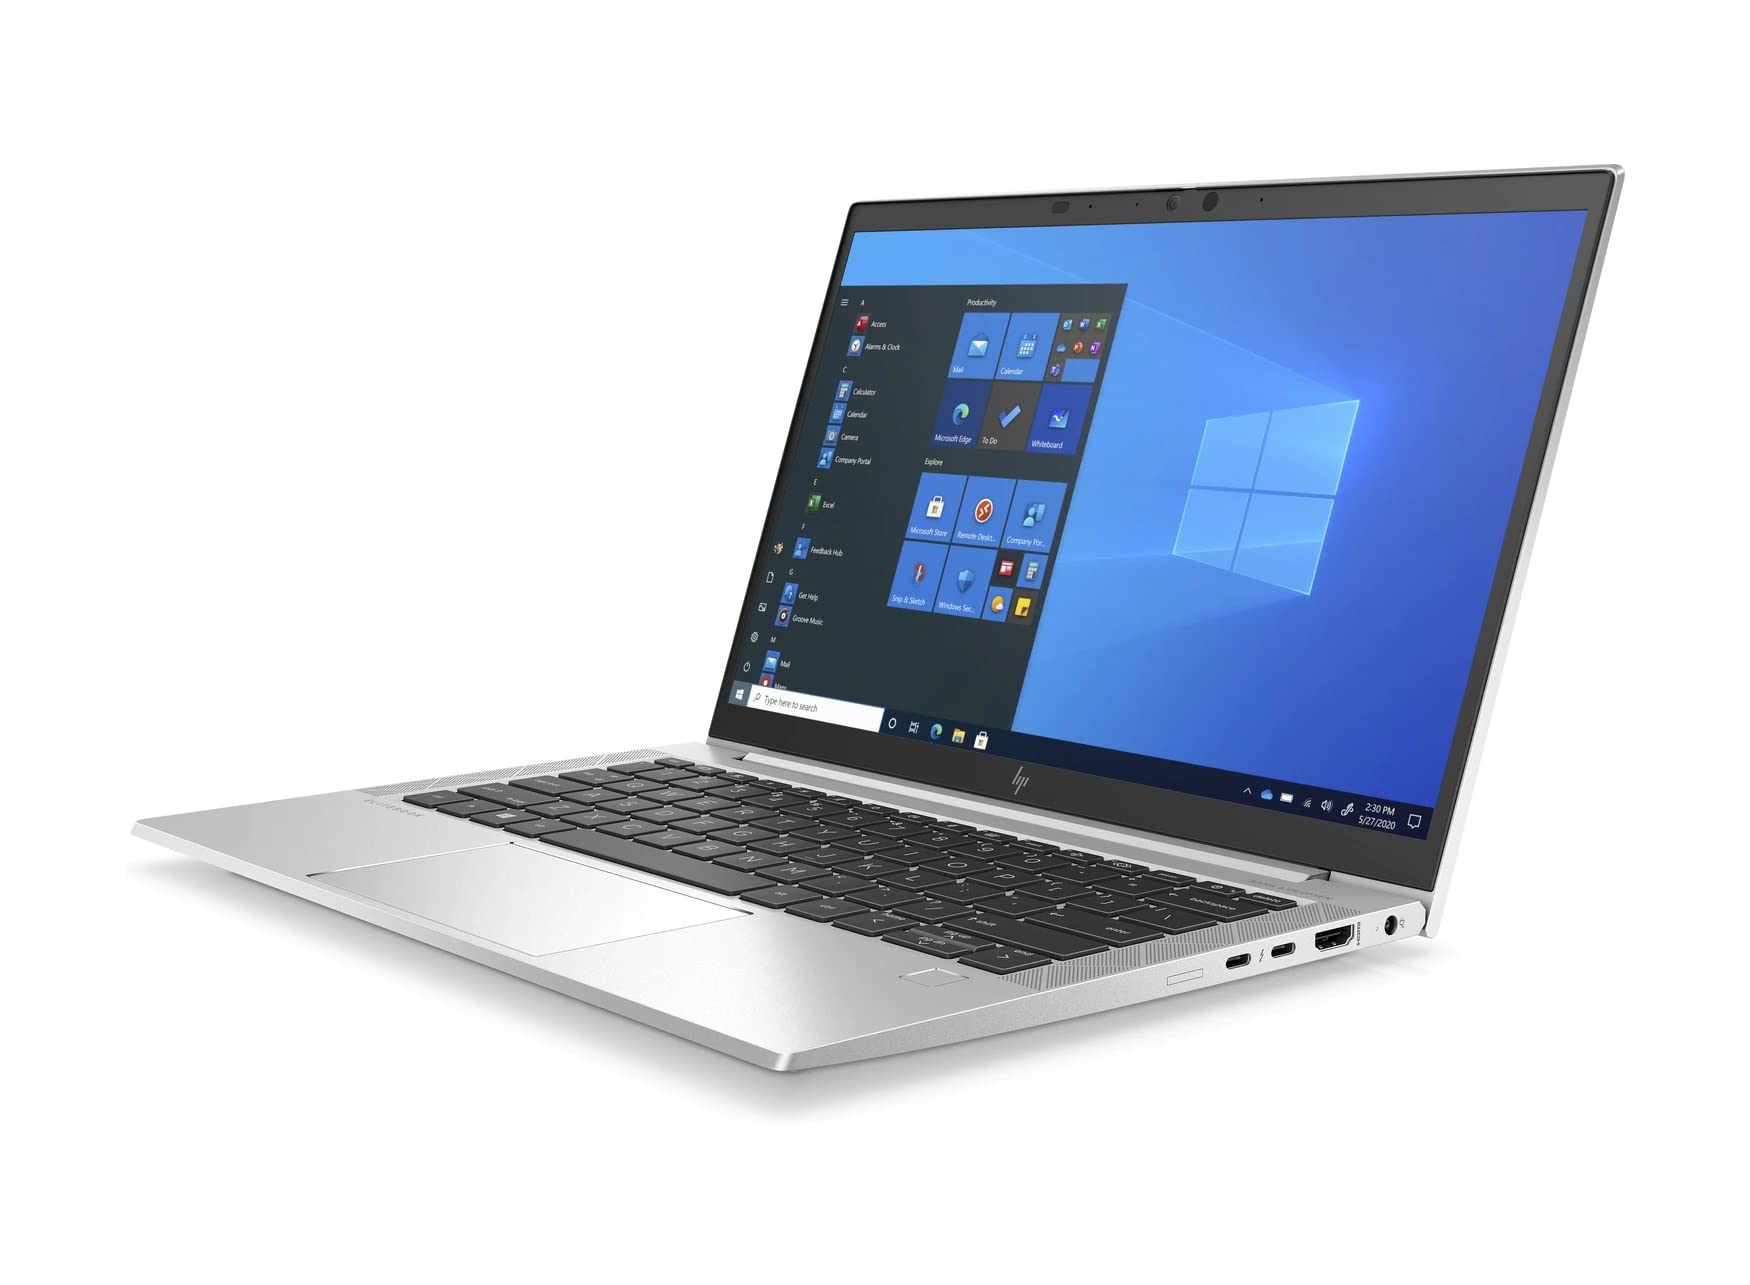 HP EliteBook 830 G8 13.3" FHD Laptop with HP Sure View Privacy Screen - i7 1165G7, 16GB DDR4, 1TB SSD, Smart Card Reader, WIFI 6E & BT 5.2, Iris Xe Graphics, Free upgrade to Windows 11 Pro (Renewed)